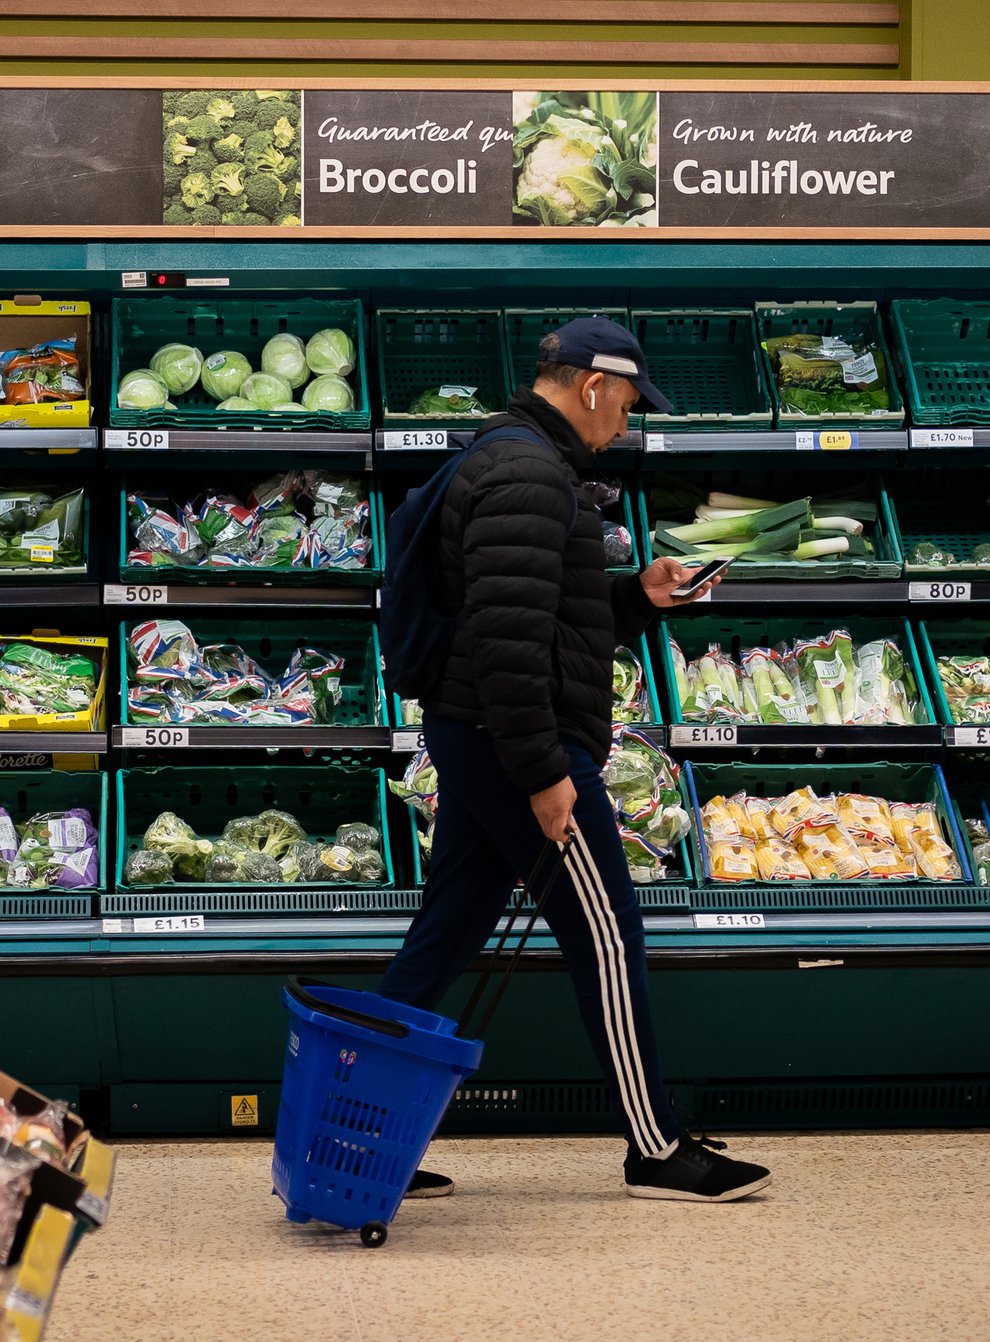 Rising prices across the board sent UK inflation soaring higher in February, according to official figures (Aaron Chown/PA)